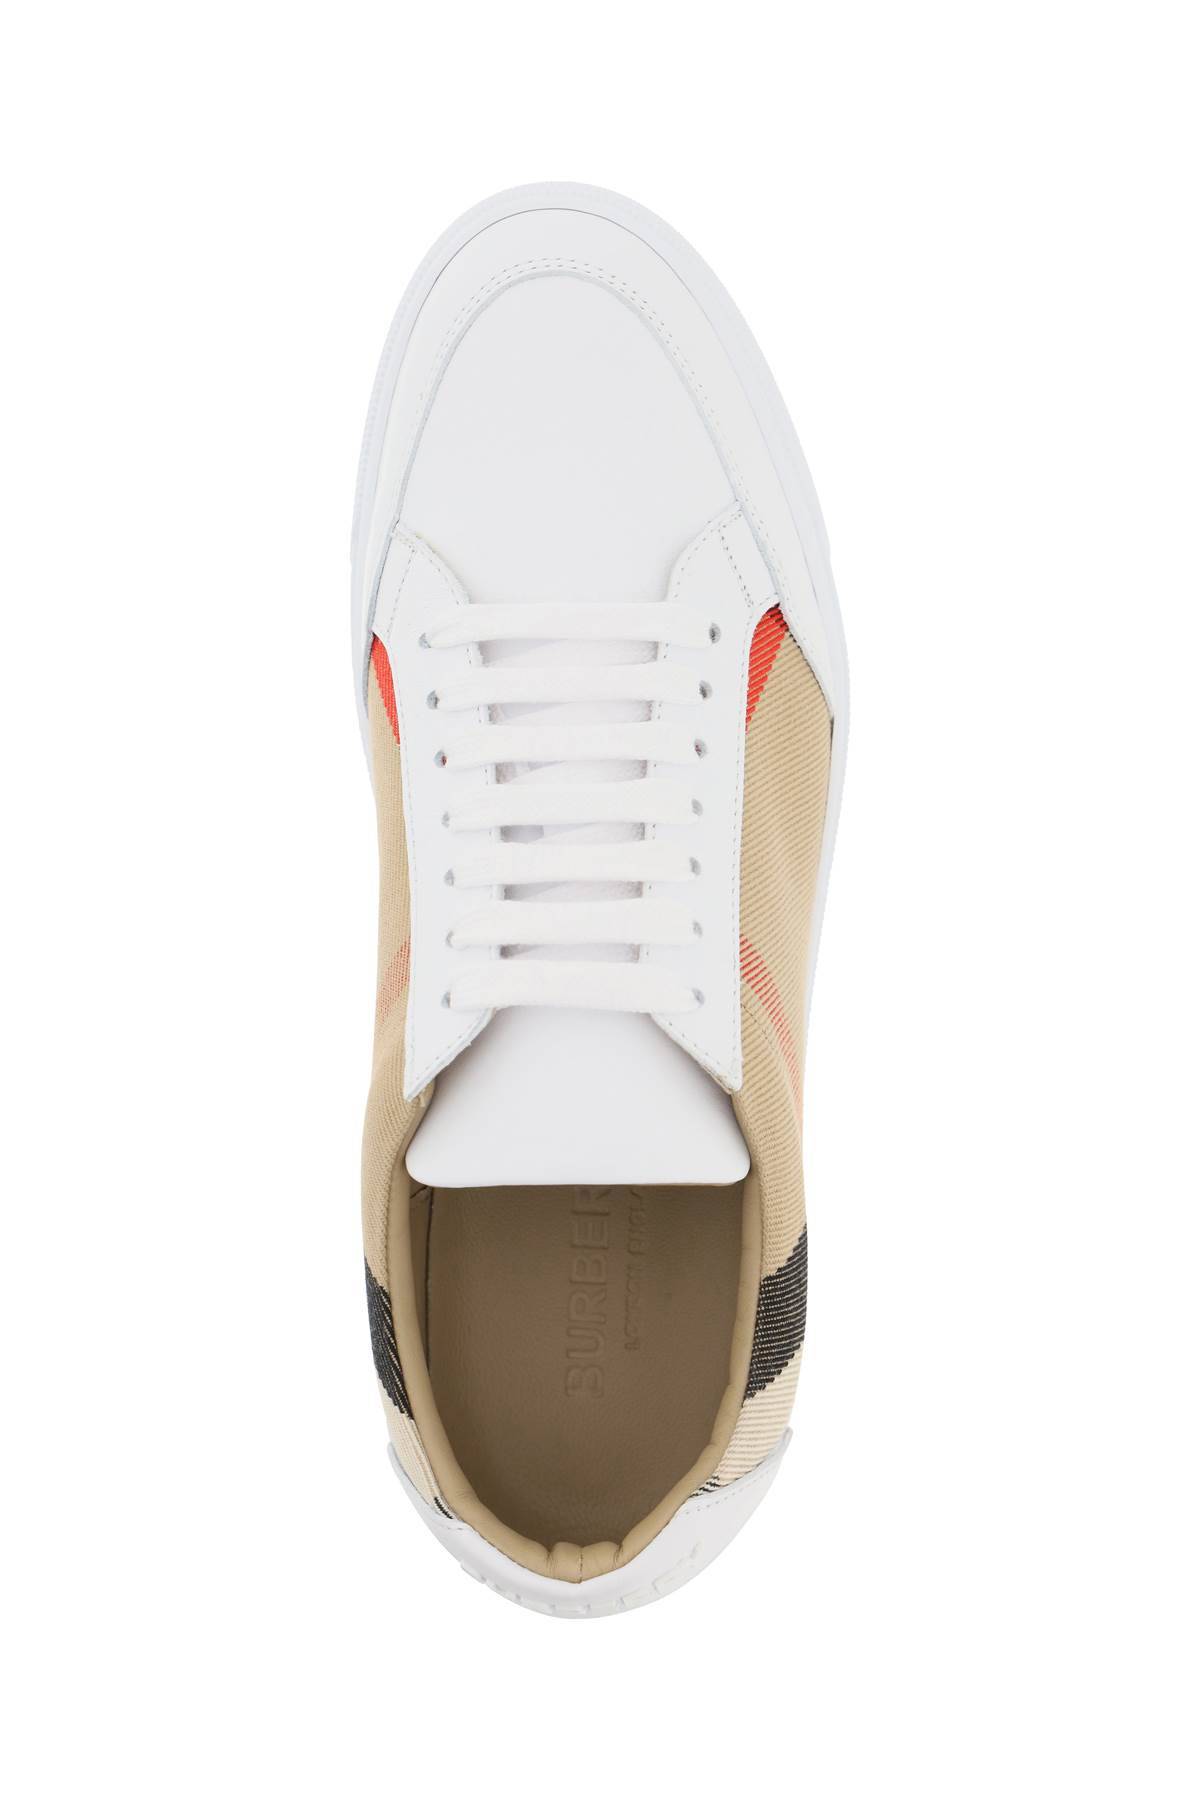 Shop Burberry Check Sneakers In Beige,white